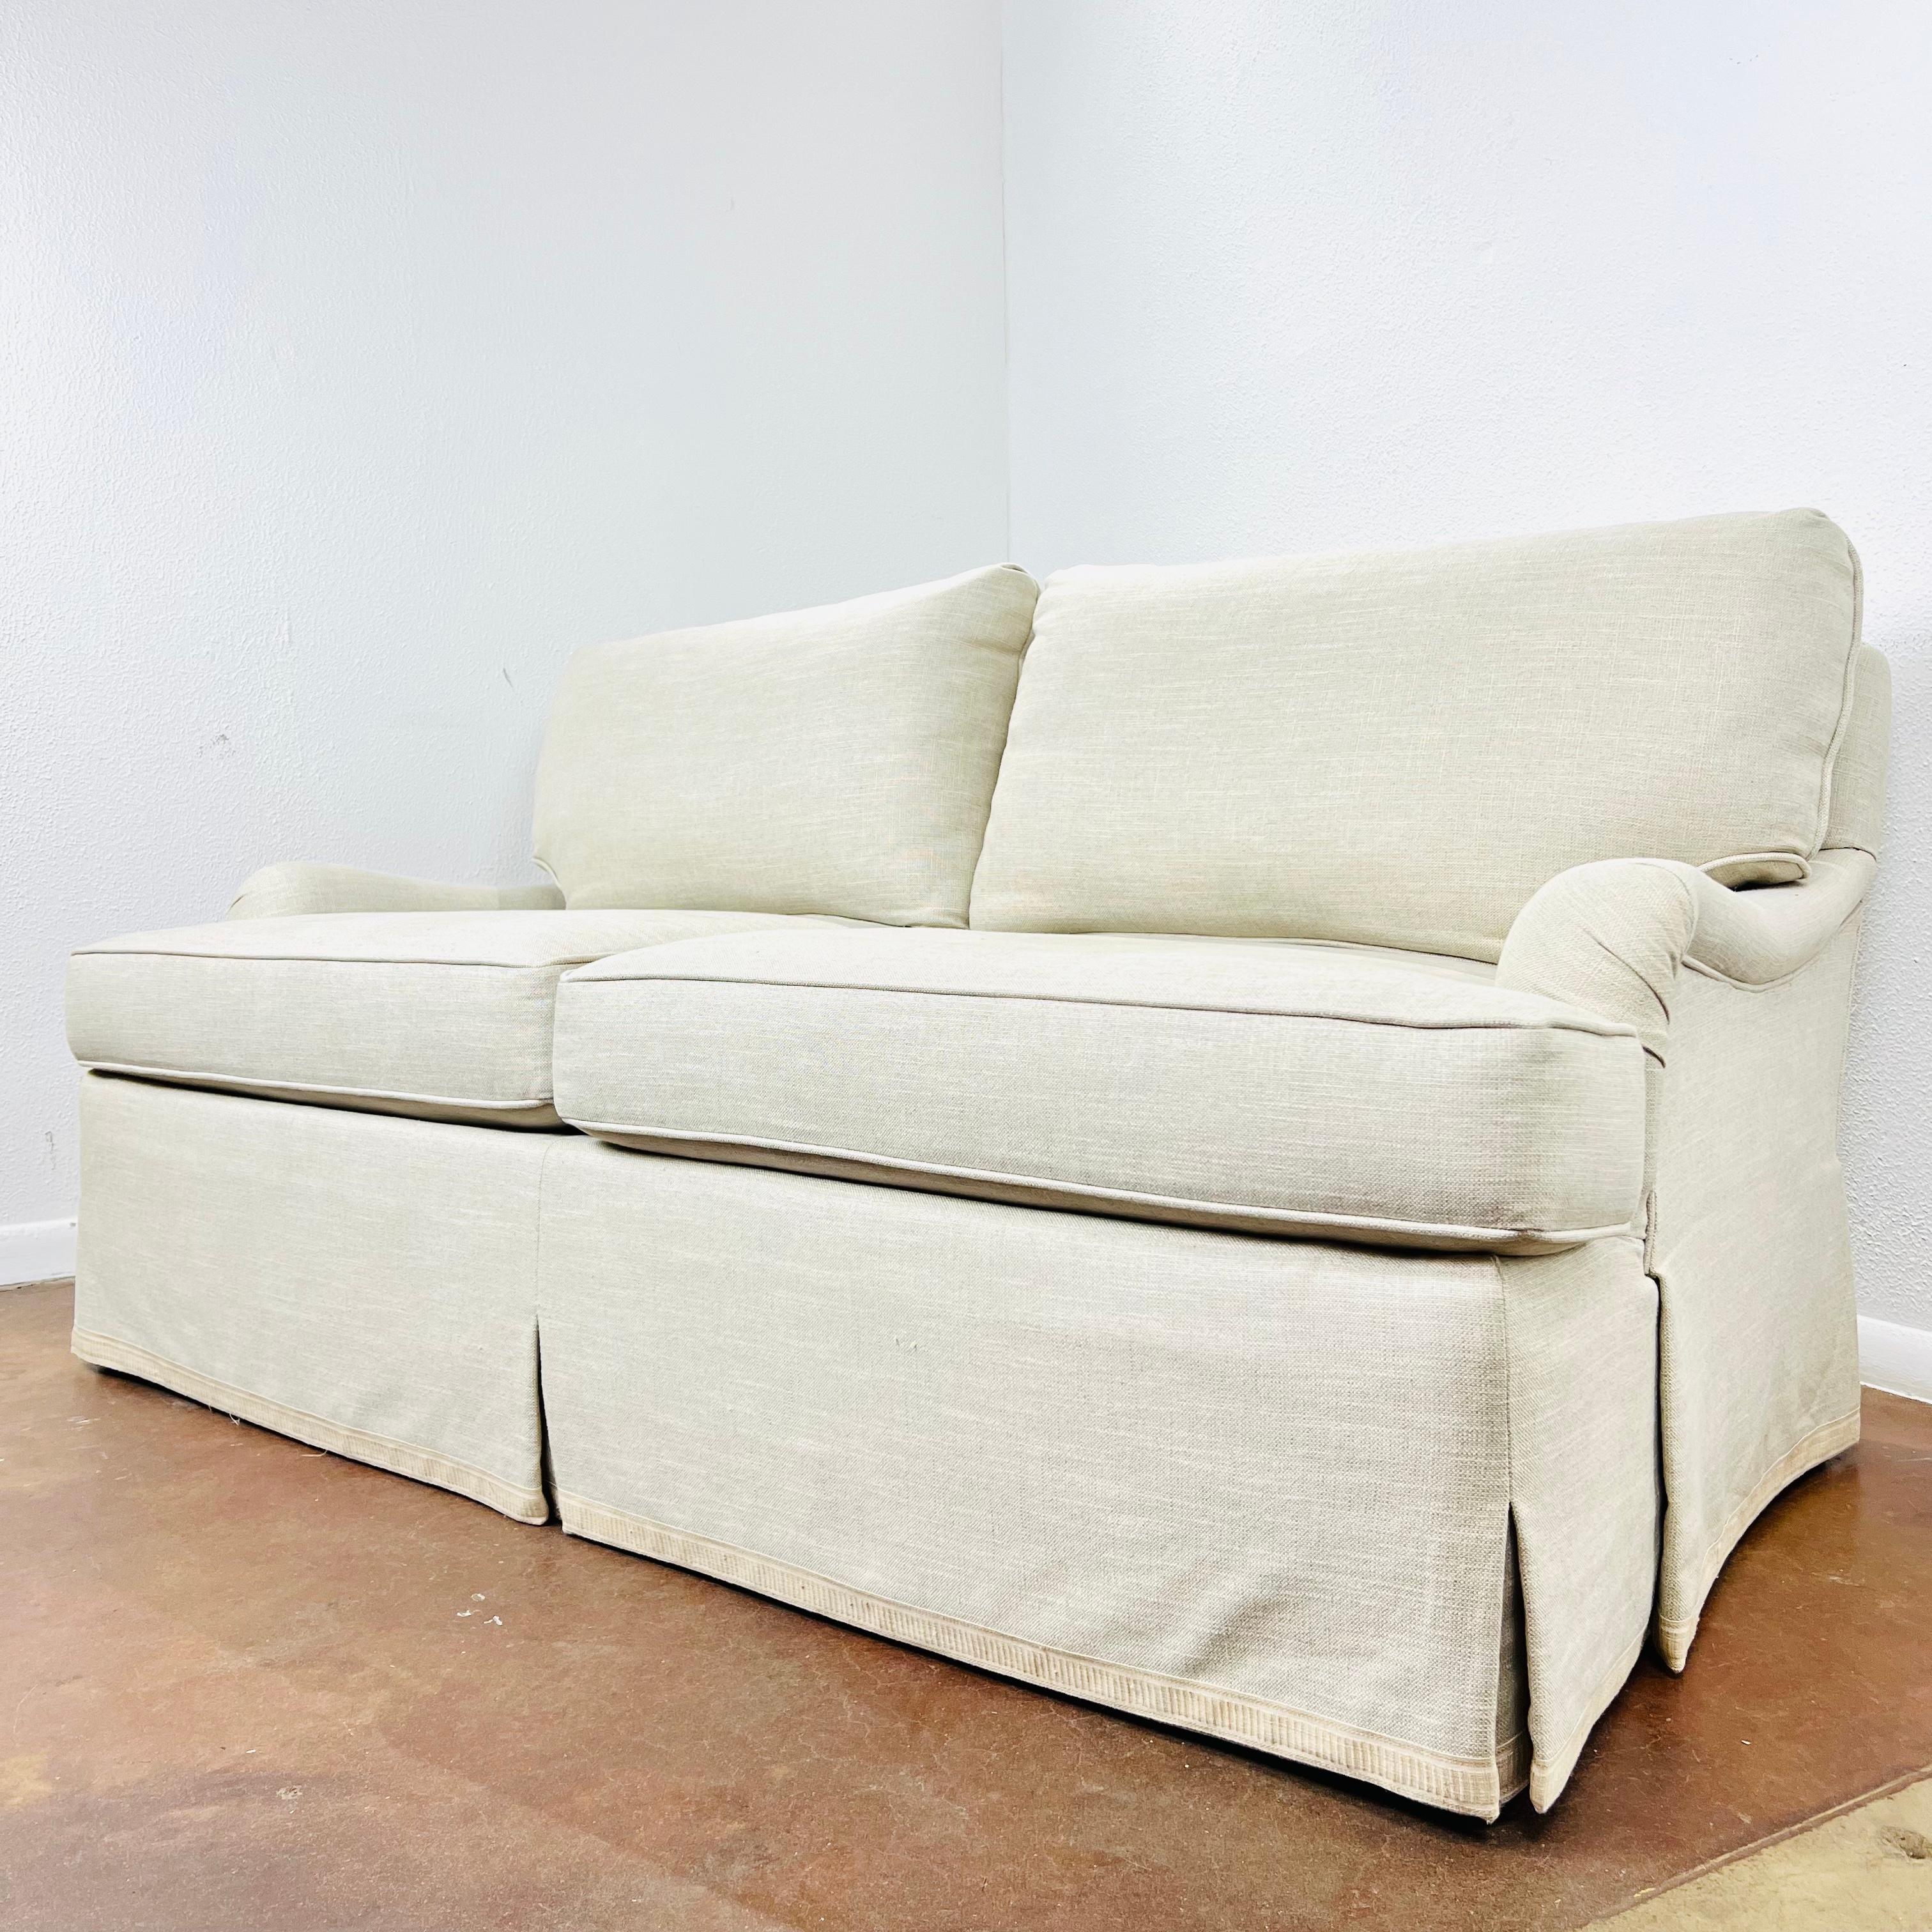 This elegant English-arm loveseat by Lee Jofa features feather down wrapped T cushions, down filled loose back cushions, and tapered legs under a waterfall skirt. Upholstered in Lee Jofa linen fabric. Very good condition with no rips, tears, or